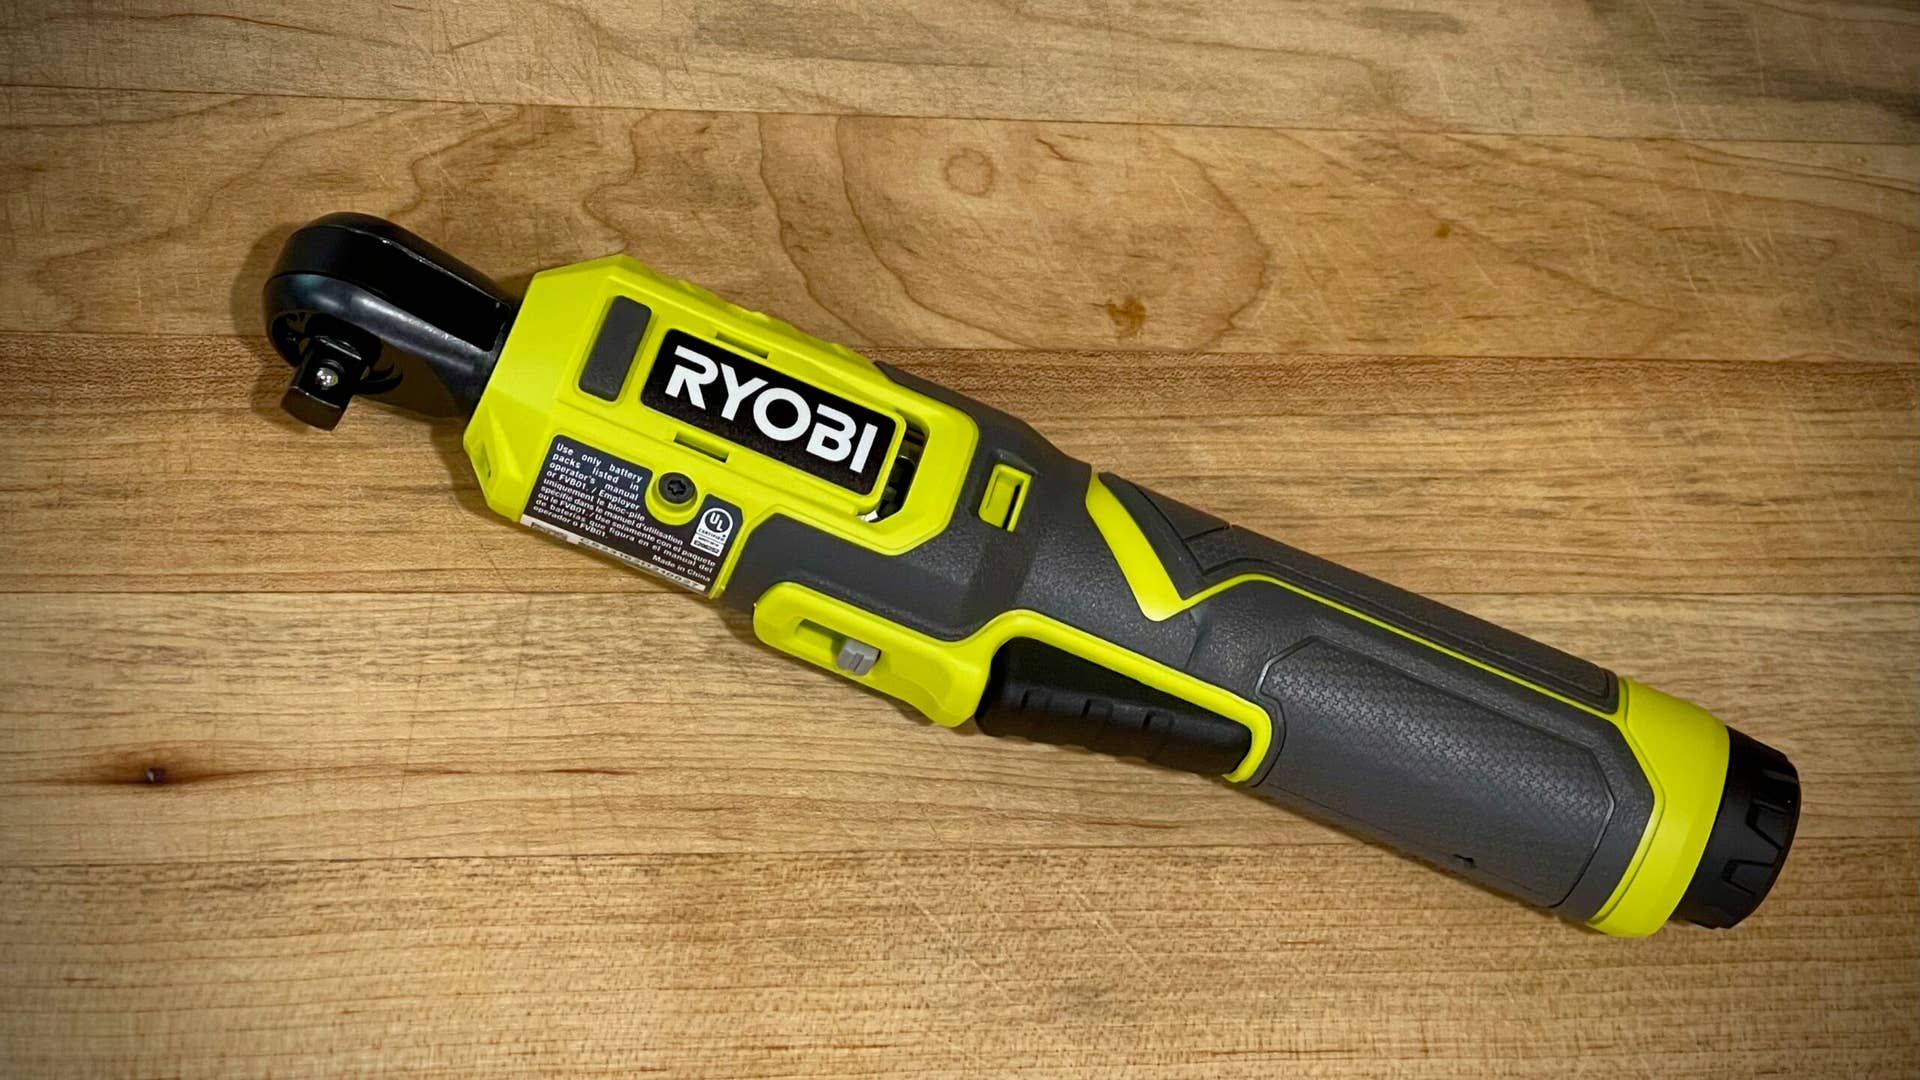 First Impression Review: Ryobi USB Lithium ⅜ Ratchet Fits In Tight Spaces